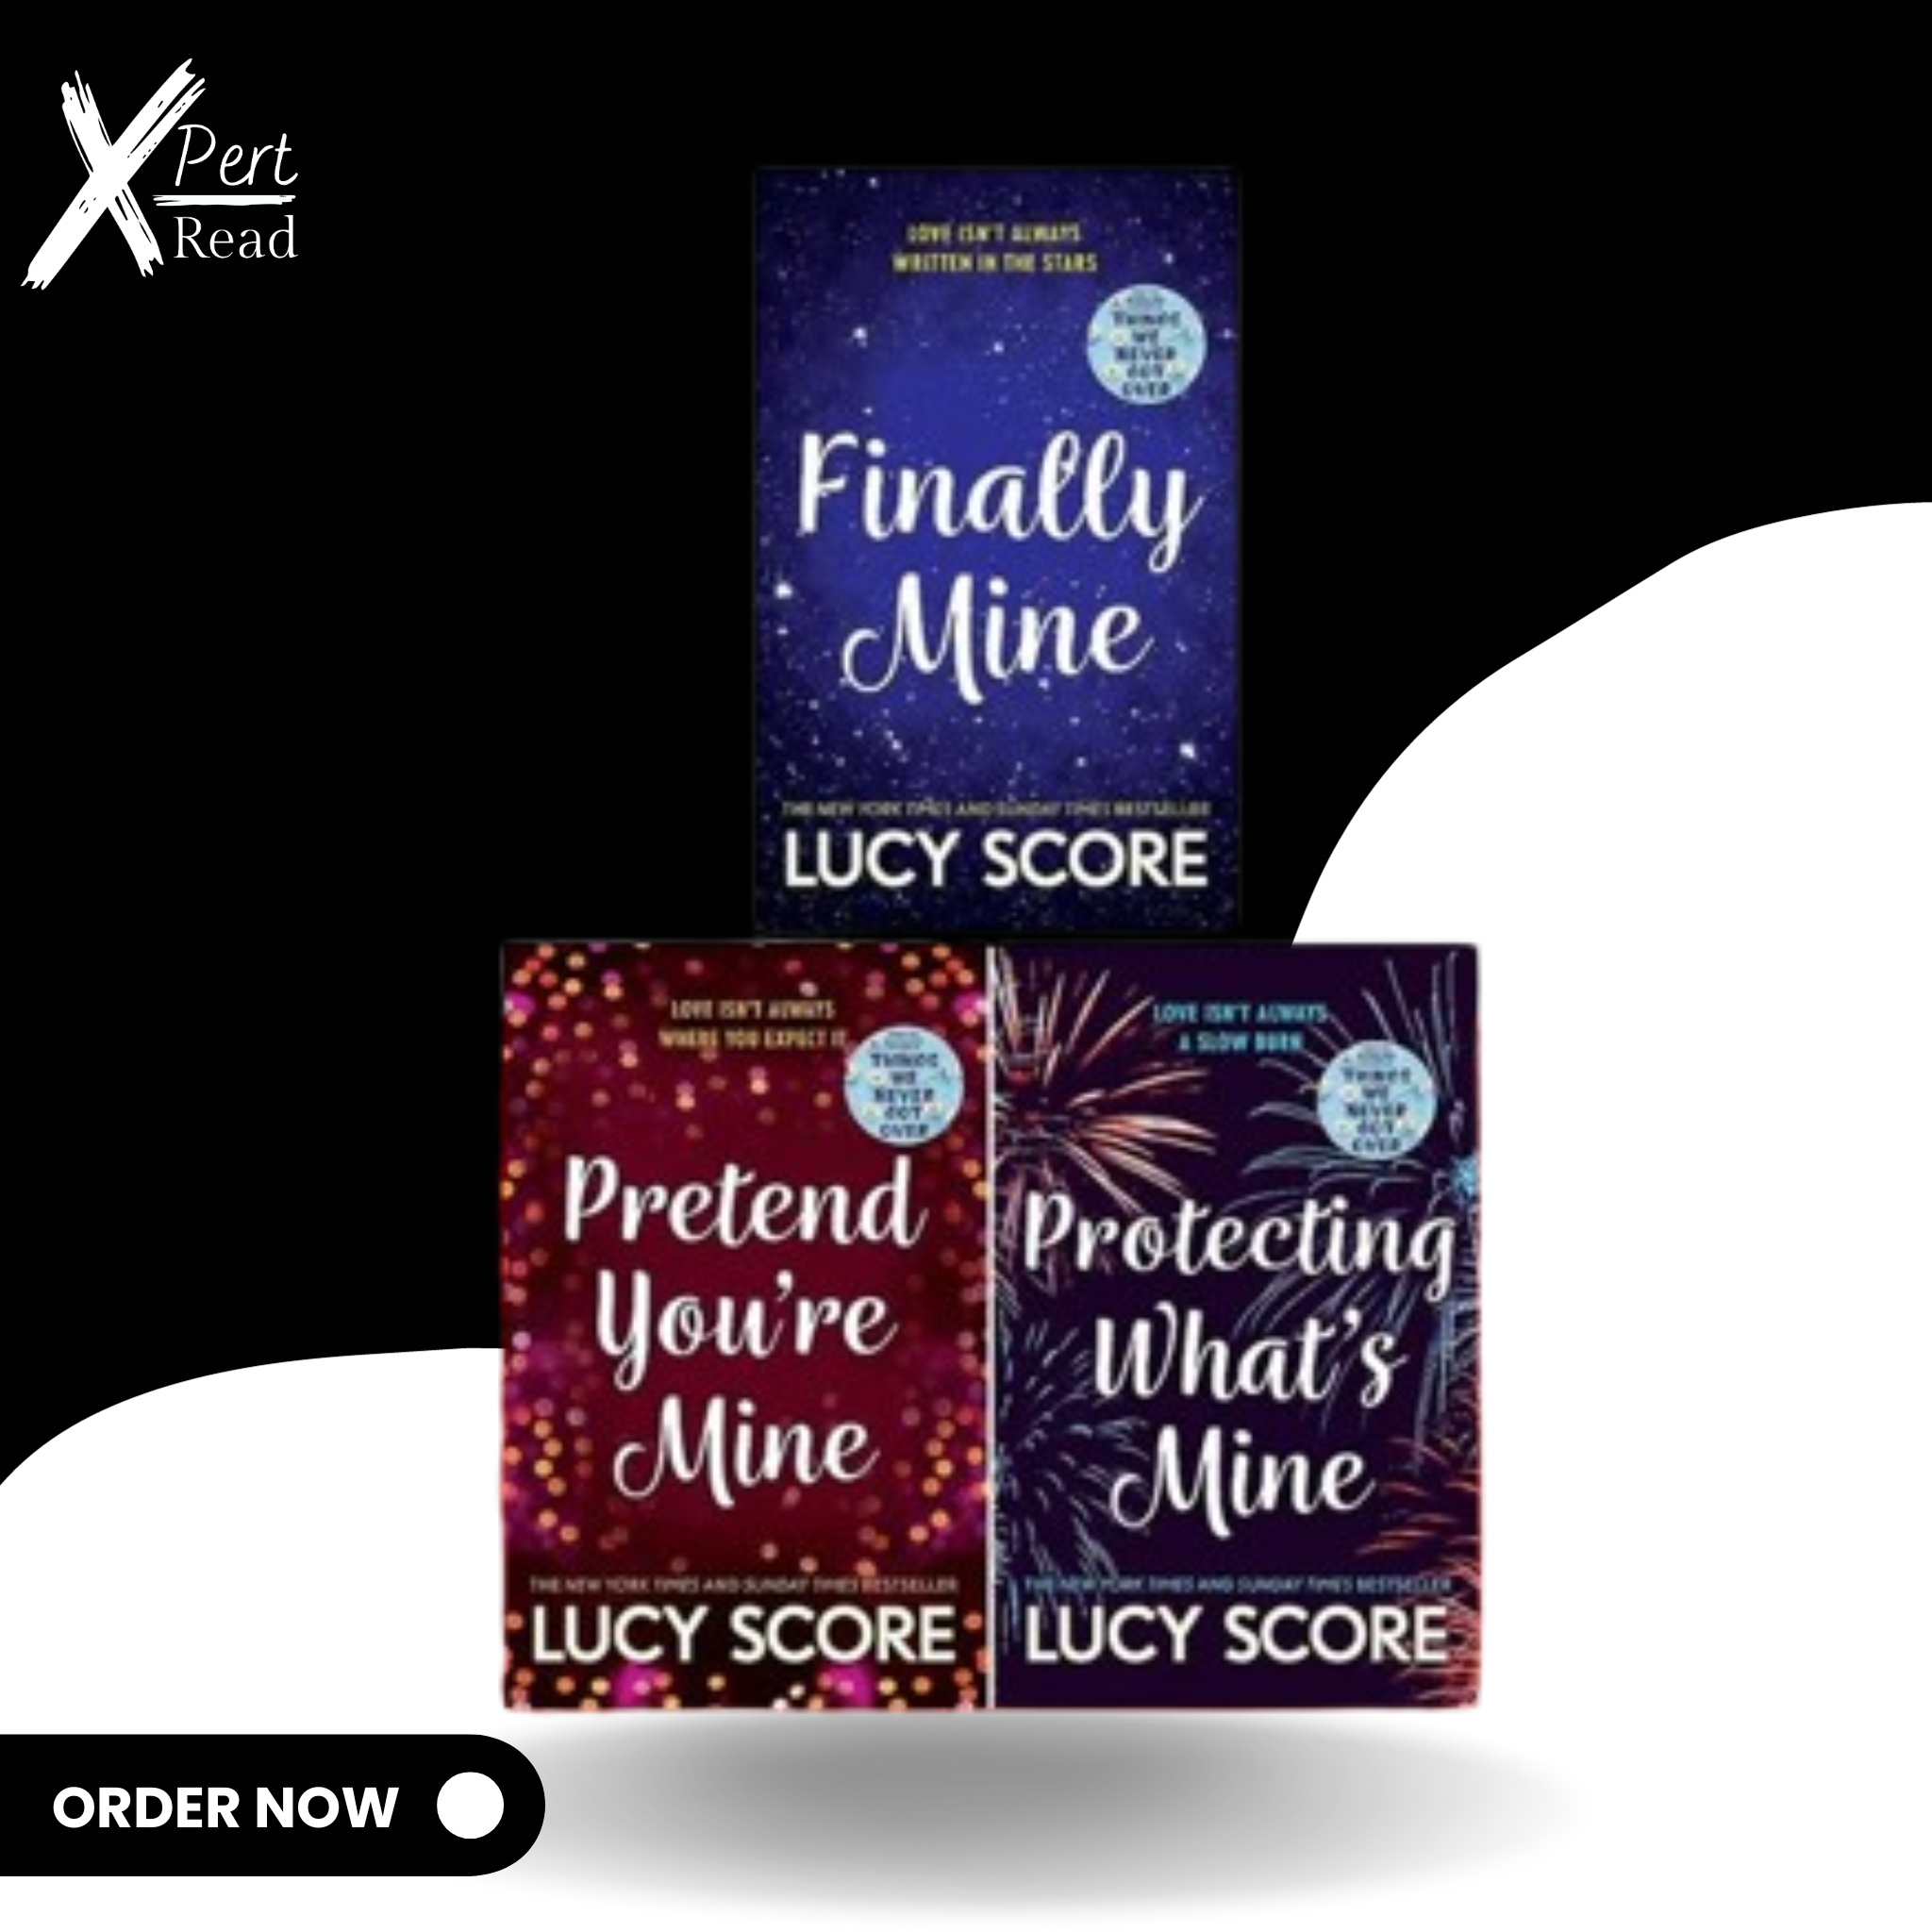 Pretend You're Mine, Finally Mine, Protecting What's Mine (3 Books) (Benevolence Series) By LUCY SCORE)